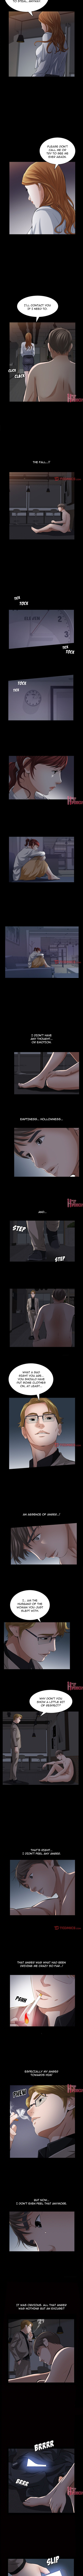 Difficult Choices Chapter 29 - Page 2